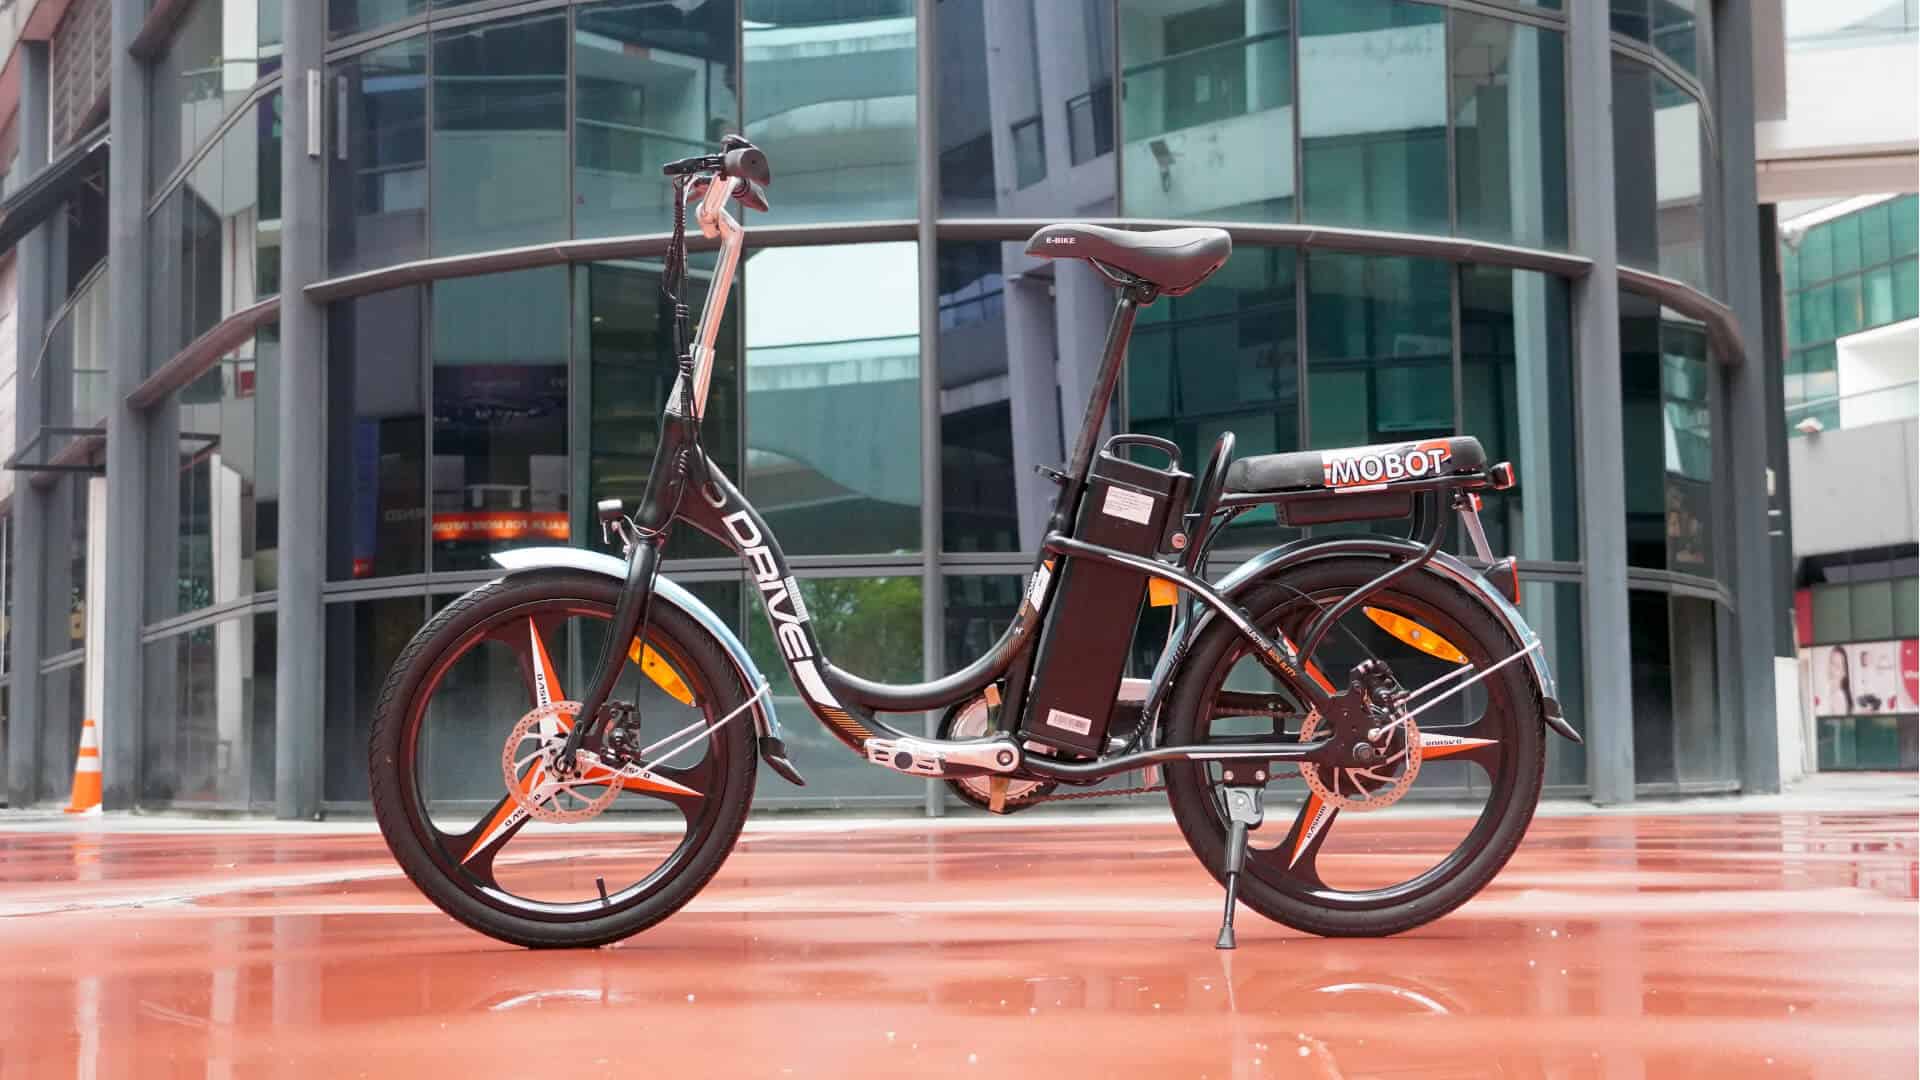 ECO DRIVE (BLACK) LTA approved electric bicycle at Oxley Bizhub 1 (1)